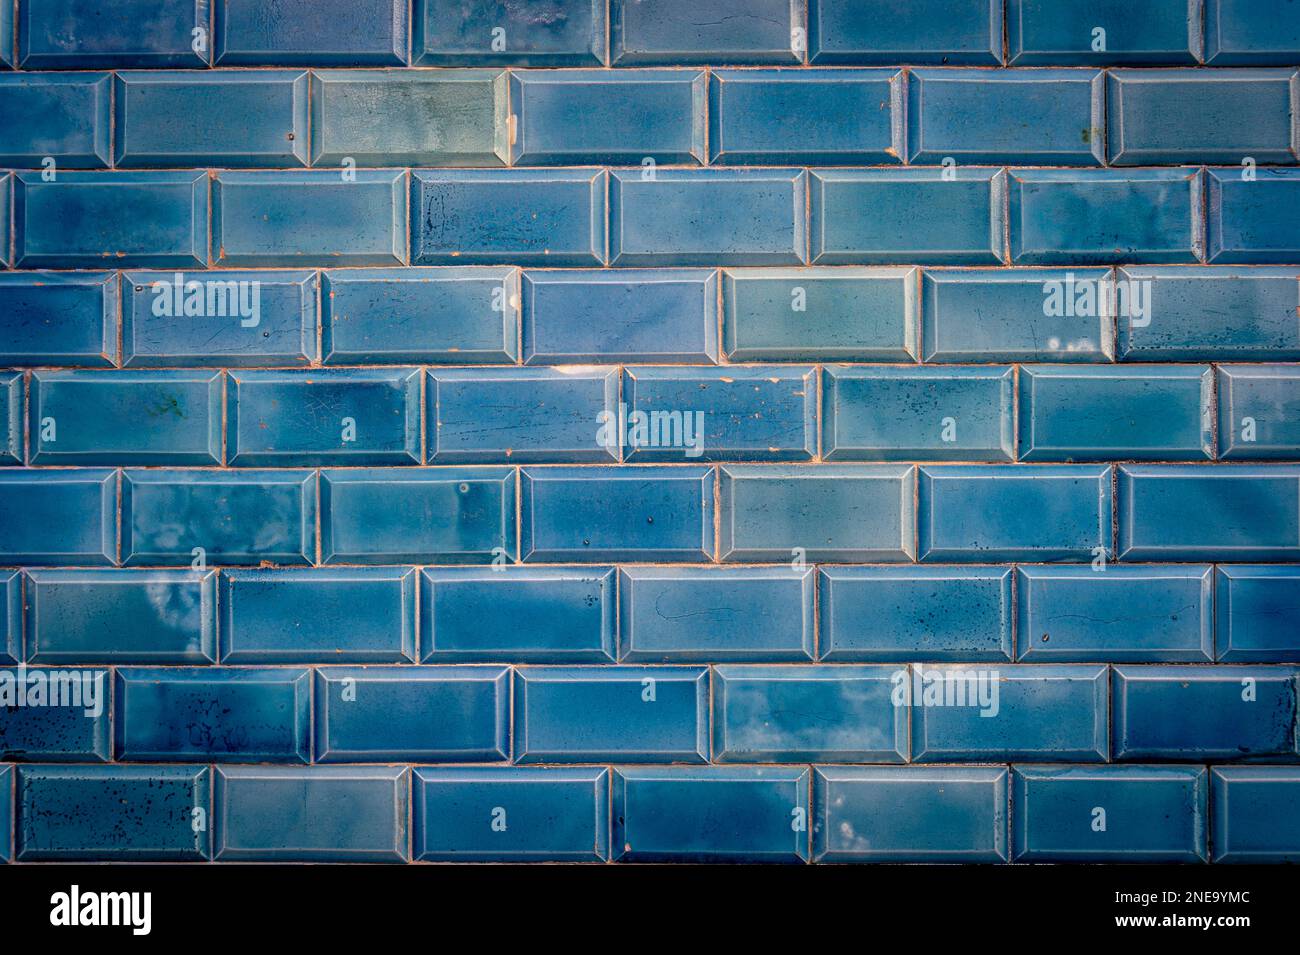 Blue mosaic tiles on an exterior wall in Portugal. Stock Photo